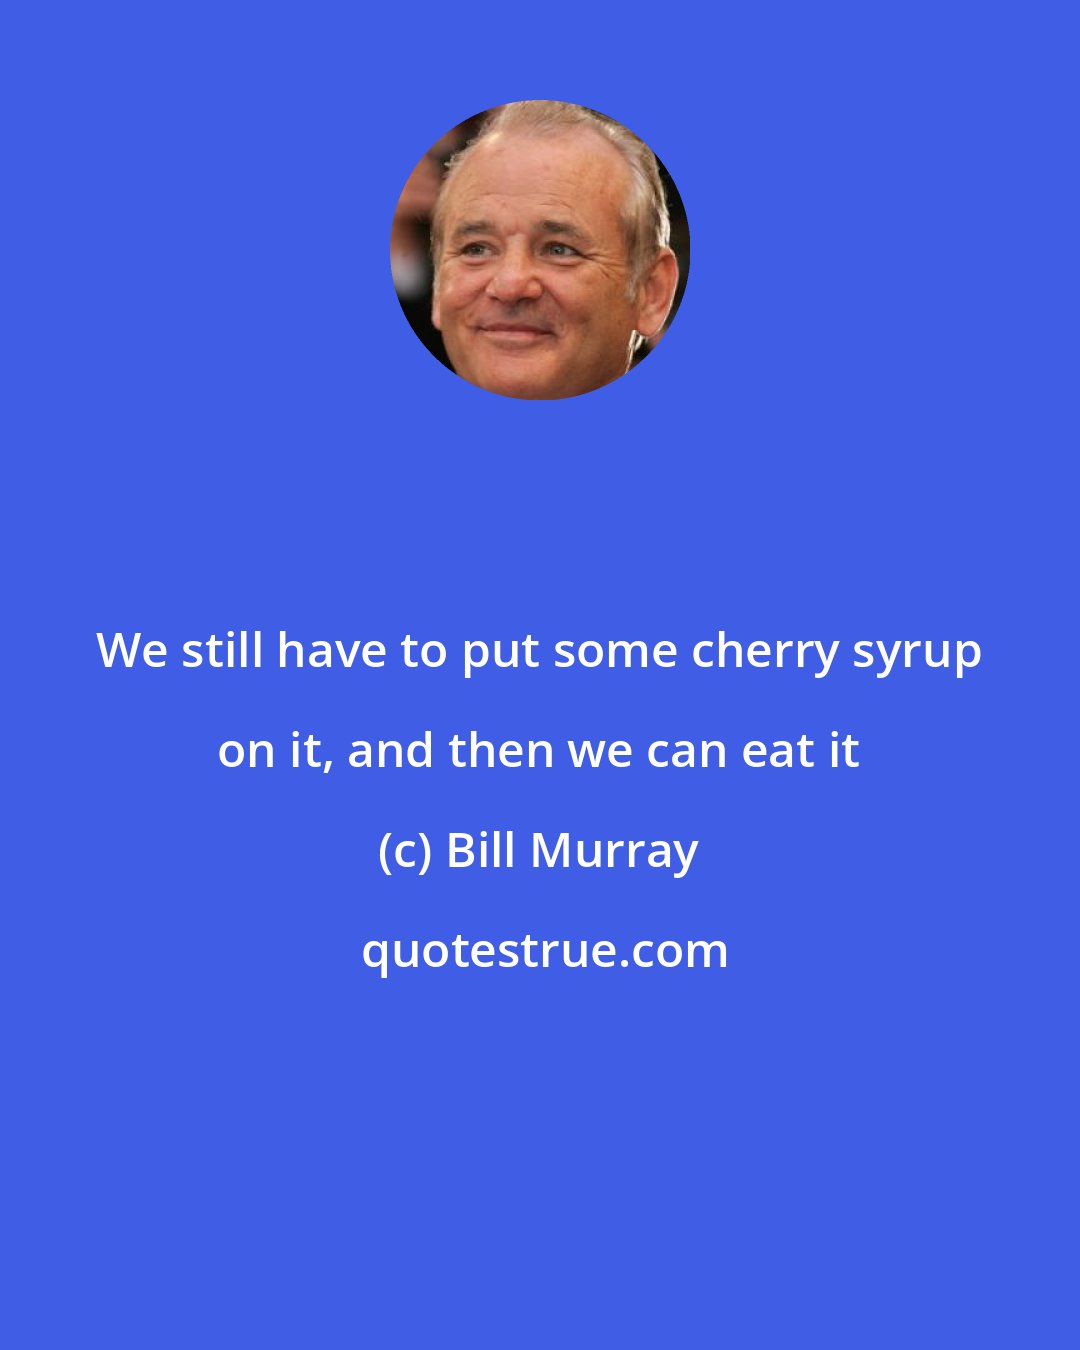 Bill Murray: We still have to put some cherry syrup on it, and then we can eat it